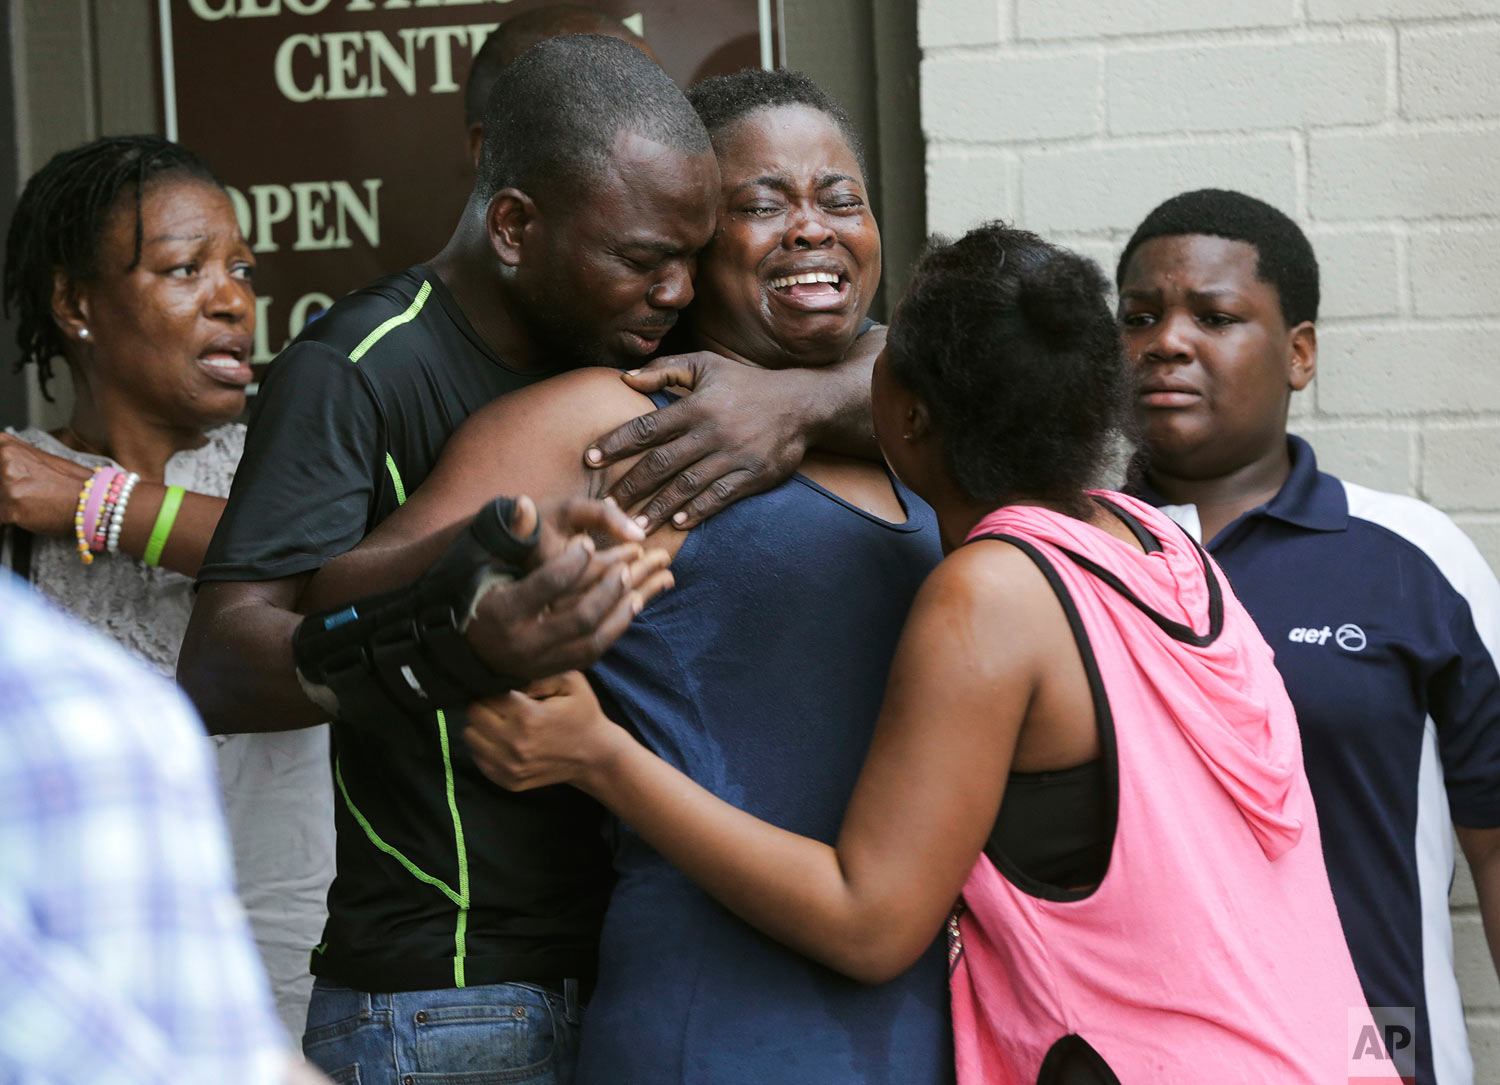  The mother, center, of two young children is comforted after she found them stabbed to death in their father's apartment in Houston on Saturday, Aug. 4, 2018. Authorities say that Jean Pierre Ndossoka, the man suspected of fatally stabbing his two c